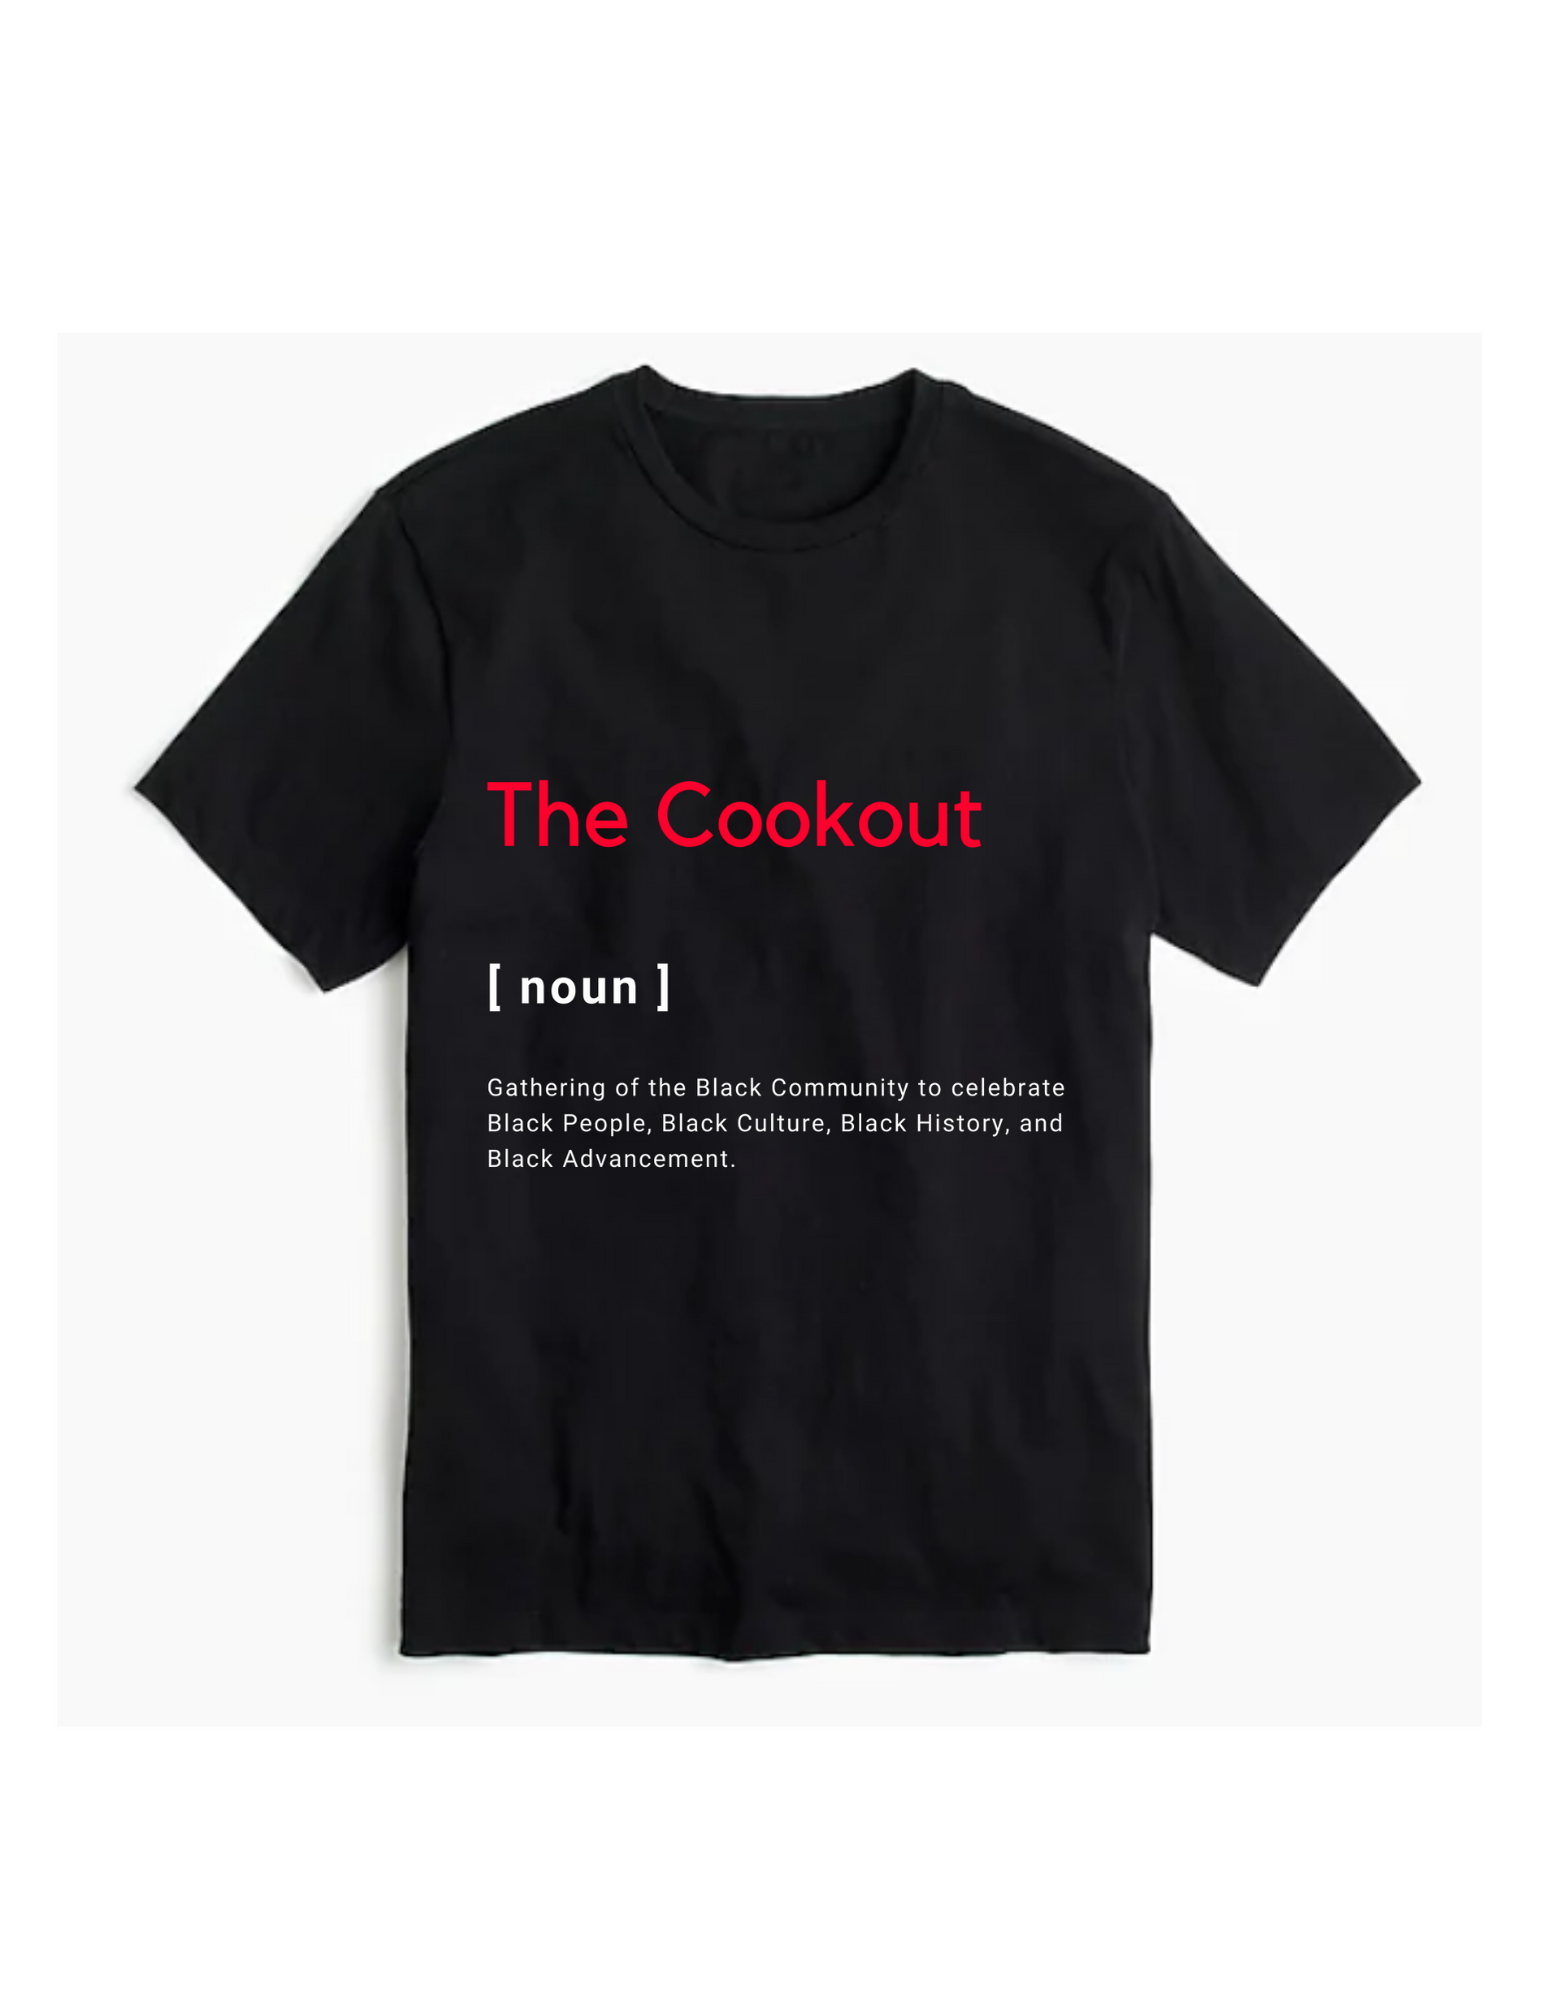 "THE COOKOUT DEFINED" - Fitted T-shirt